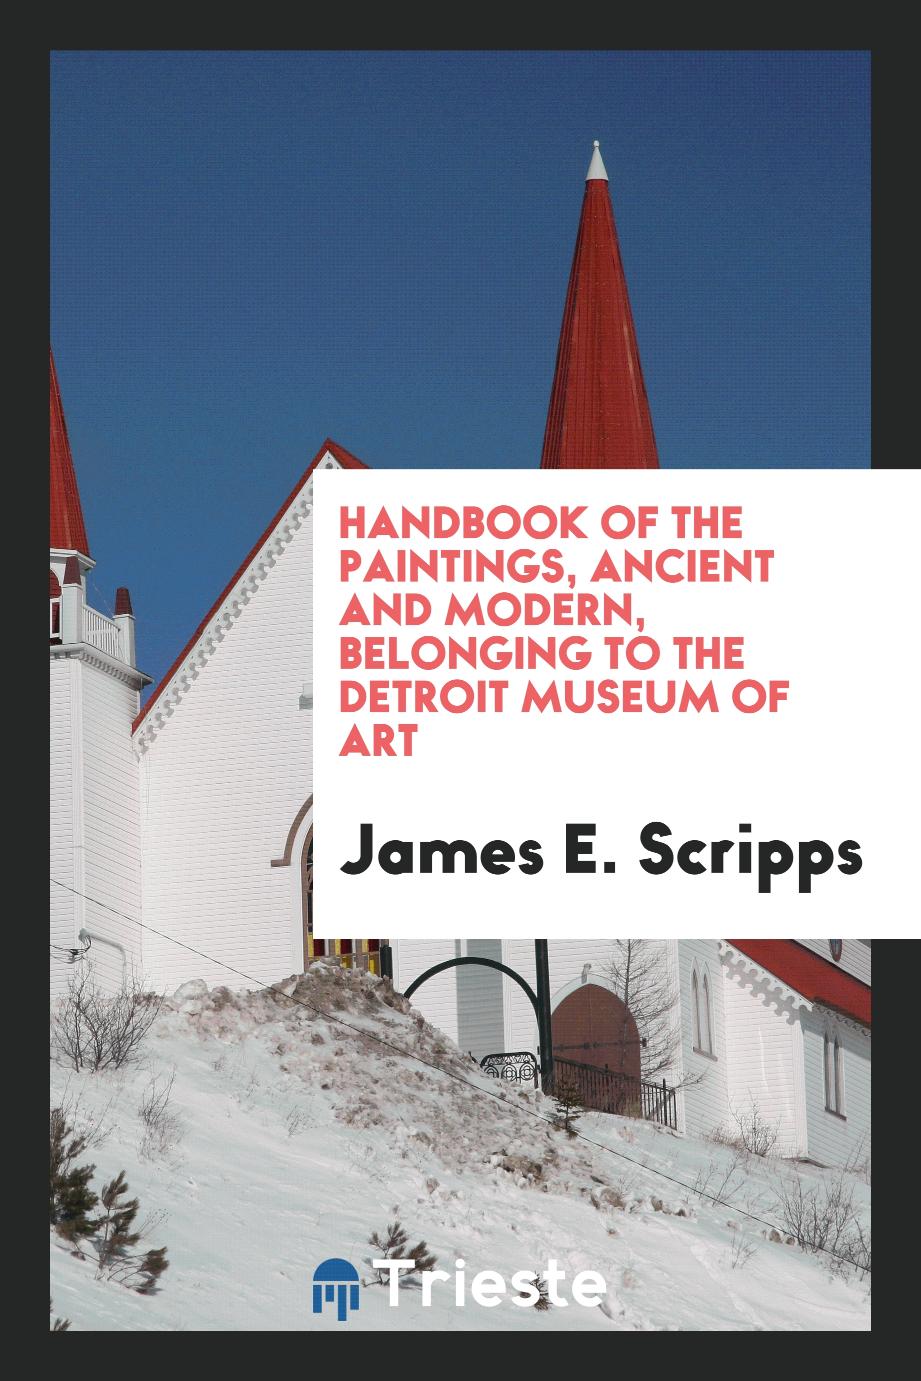 Handbook of the paintings, ancient and modern, belonging to the Detroit Museum of Art